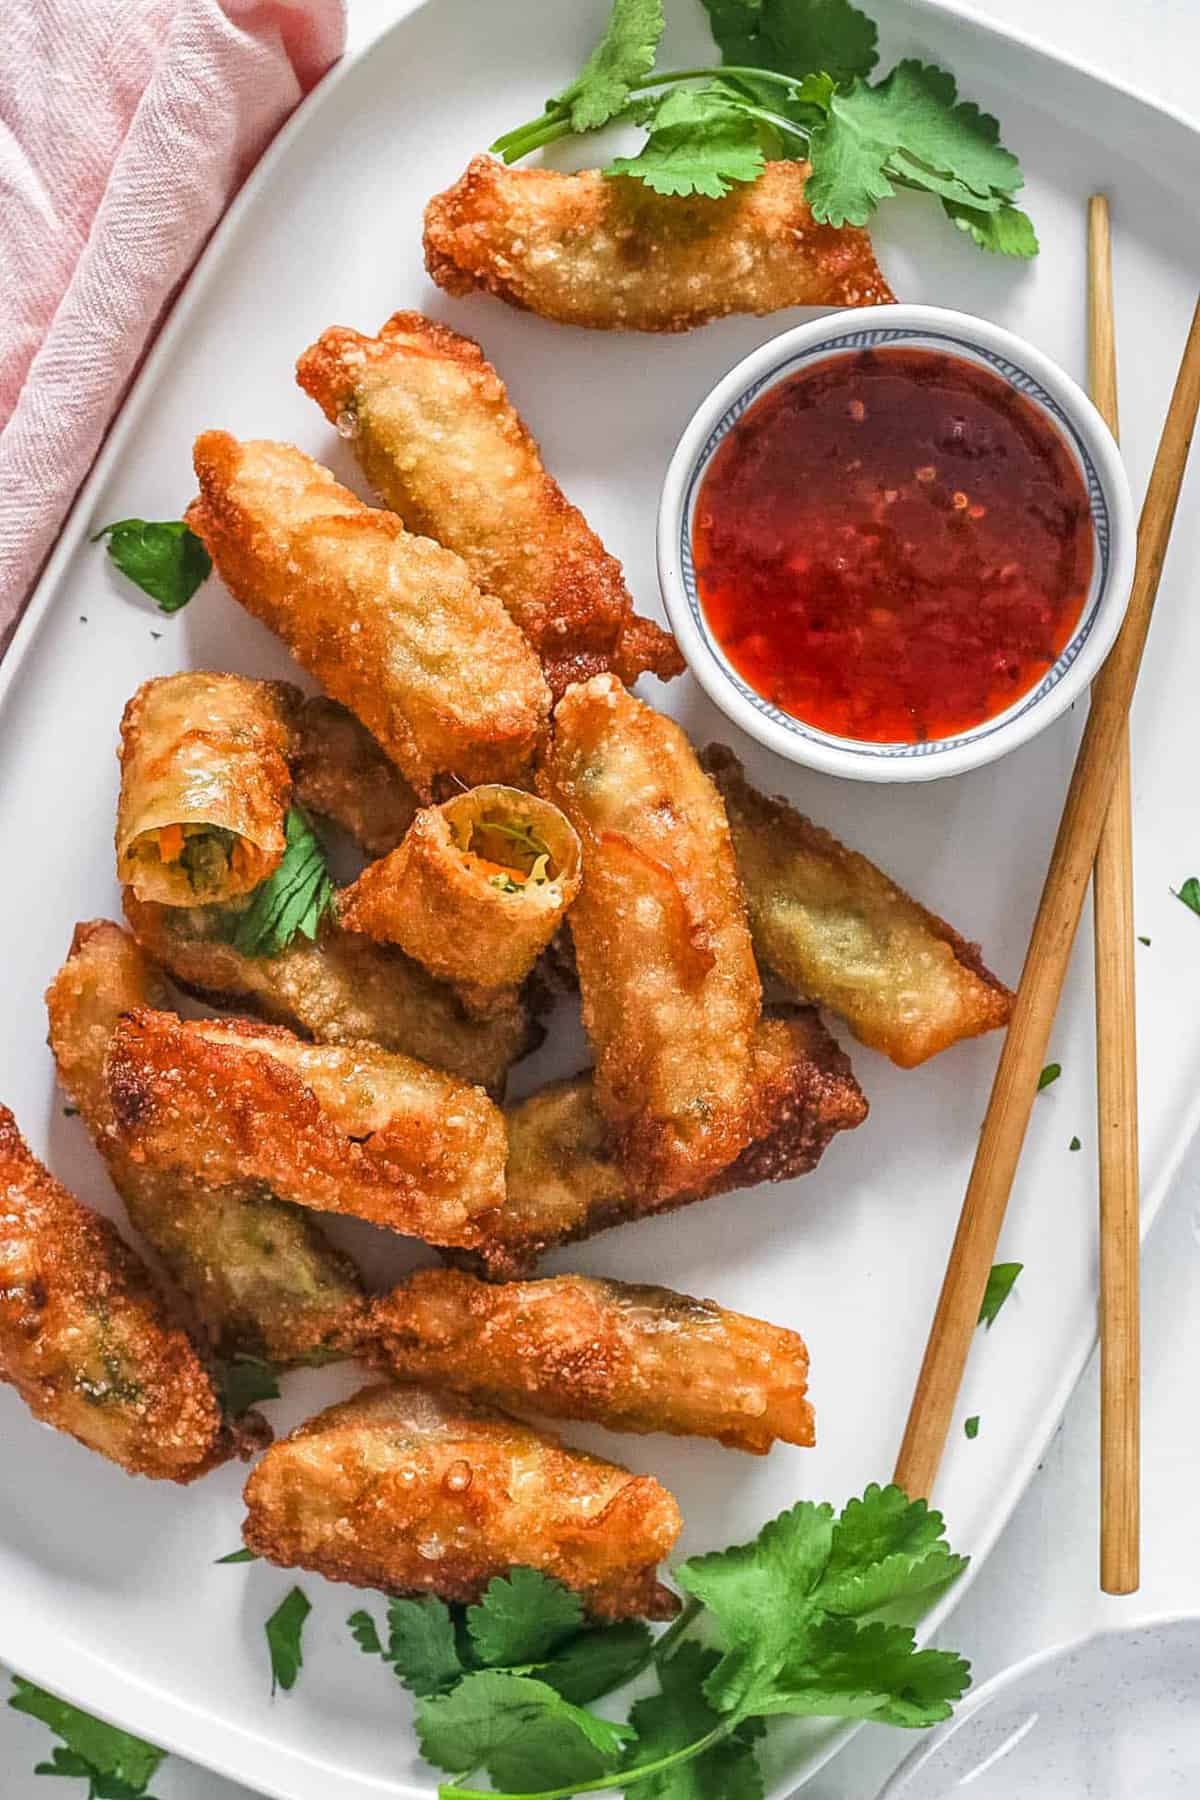 Easy vegan egg rolls served on a white plate with a dipping sauce on the side.